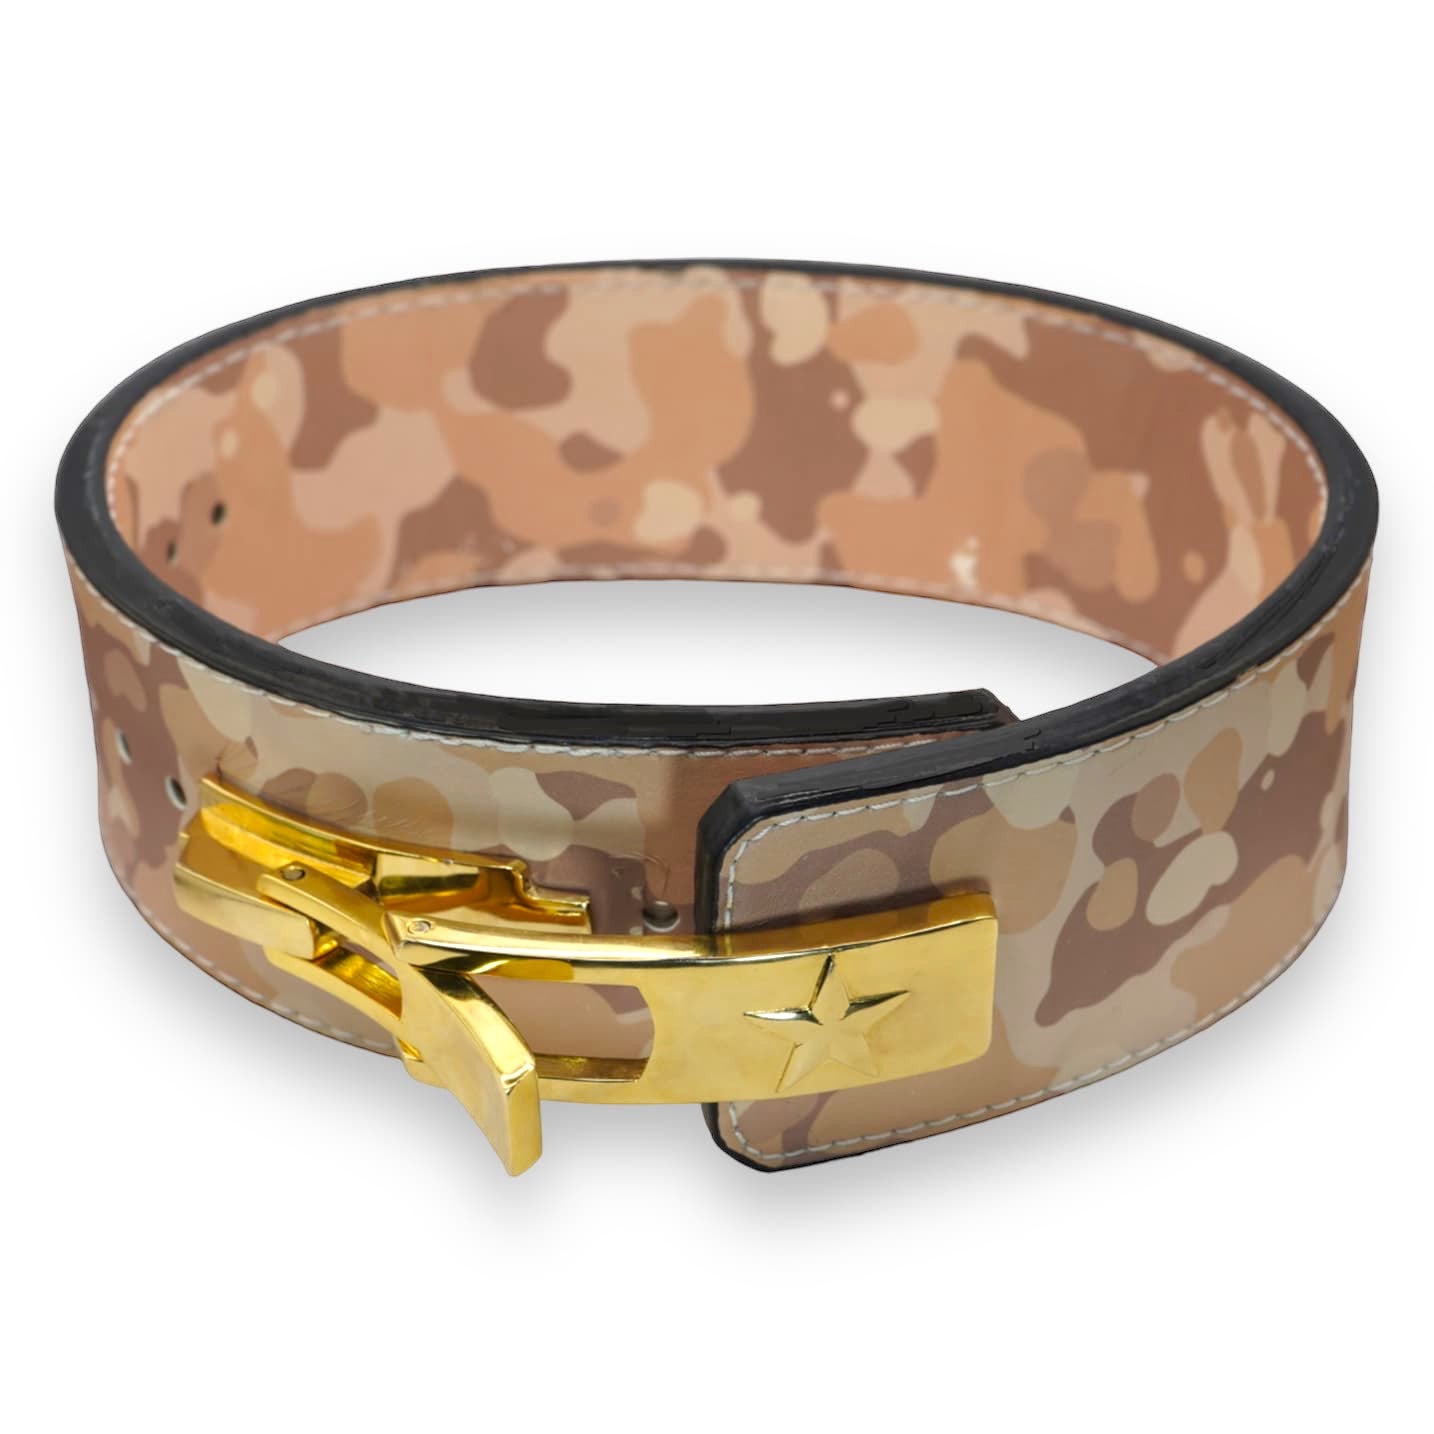 Dysel Powerlifting Belt - Desert Camo With Gold Lever